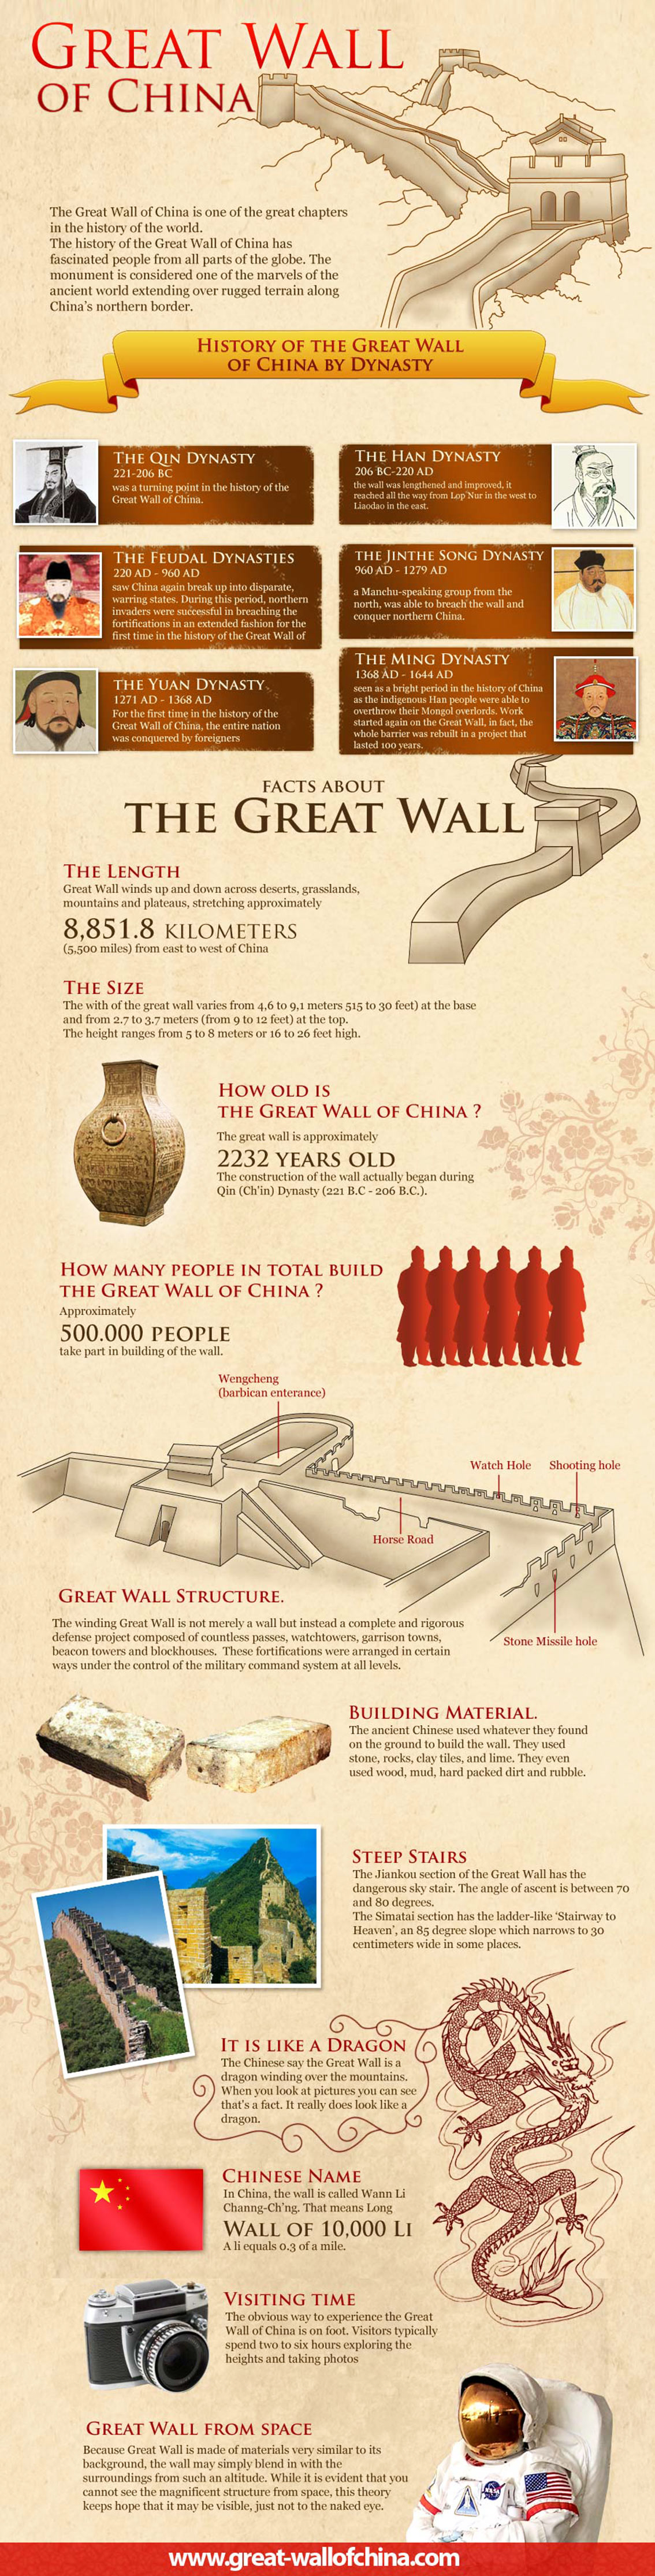 History of The Great Wall of China - Travel Infographic